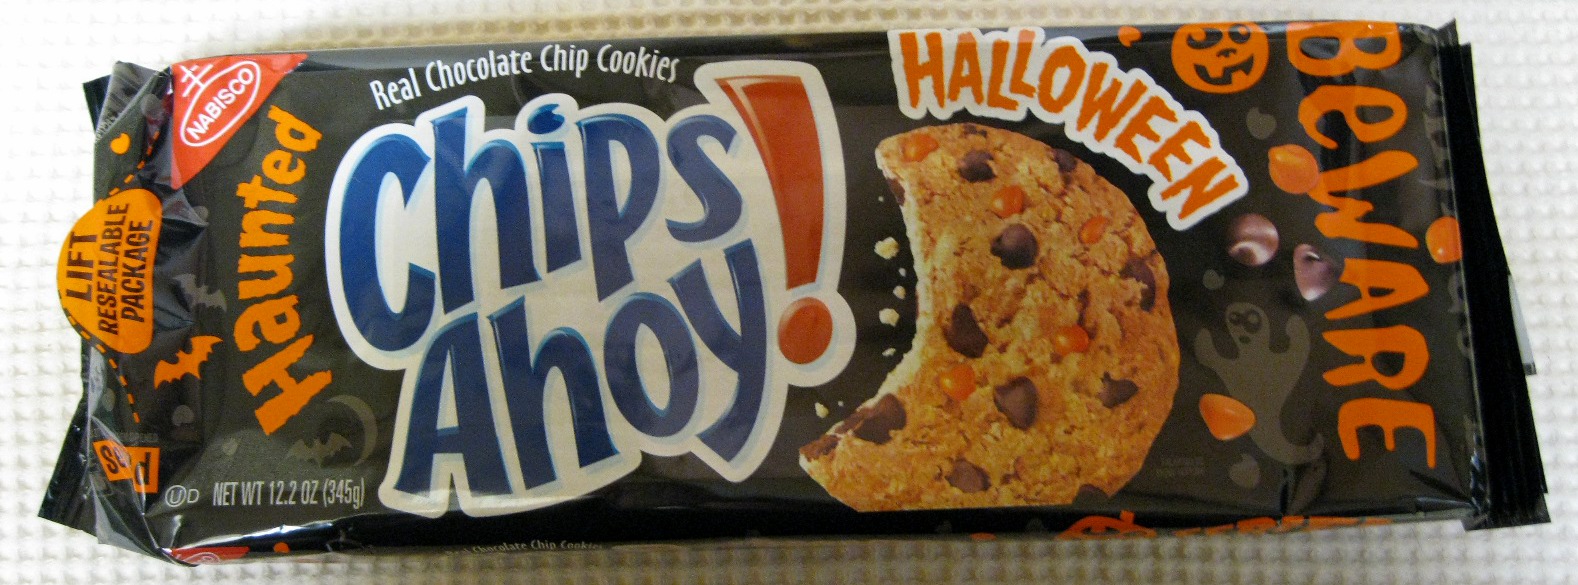 Choc Chip Packaging